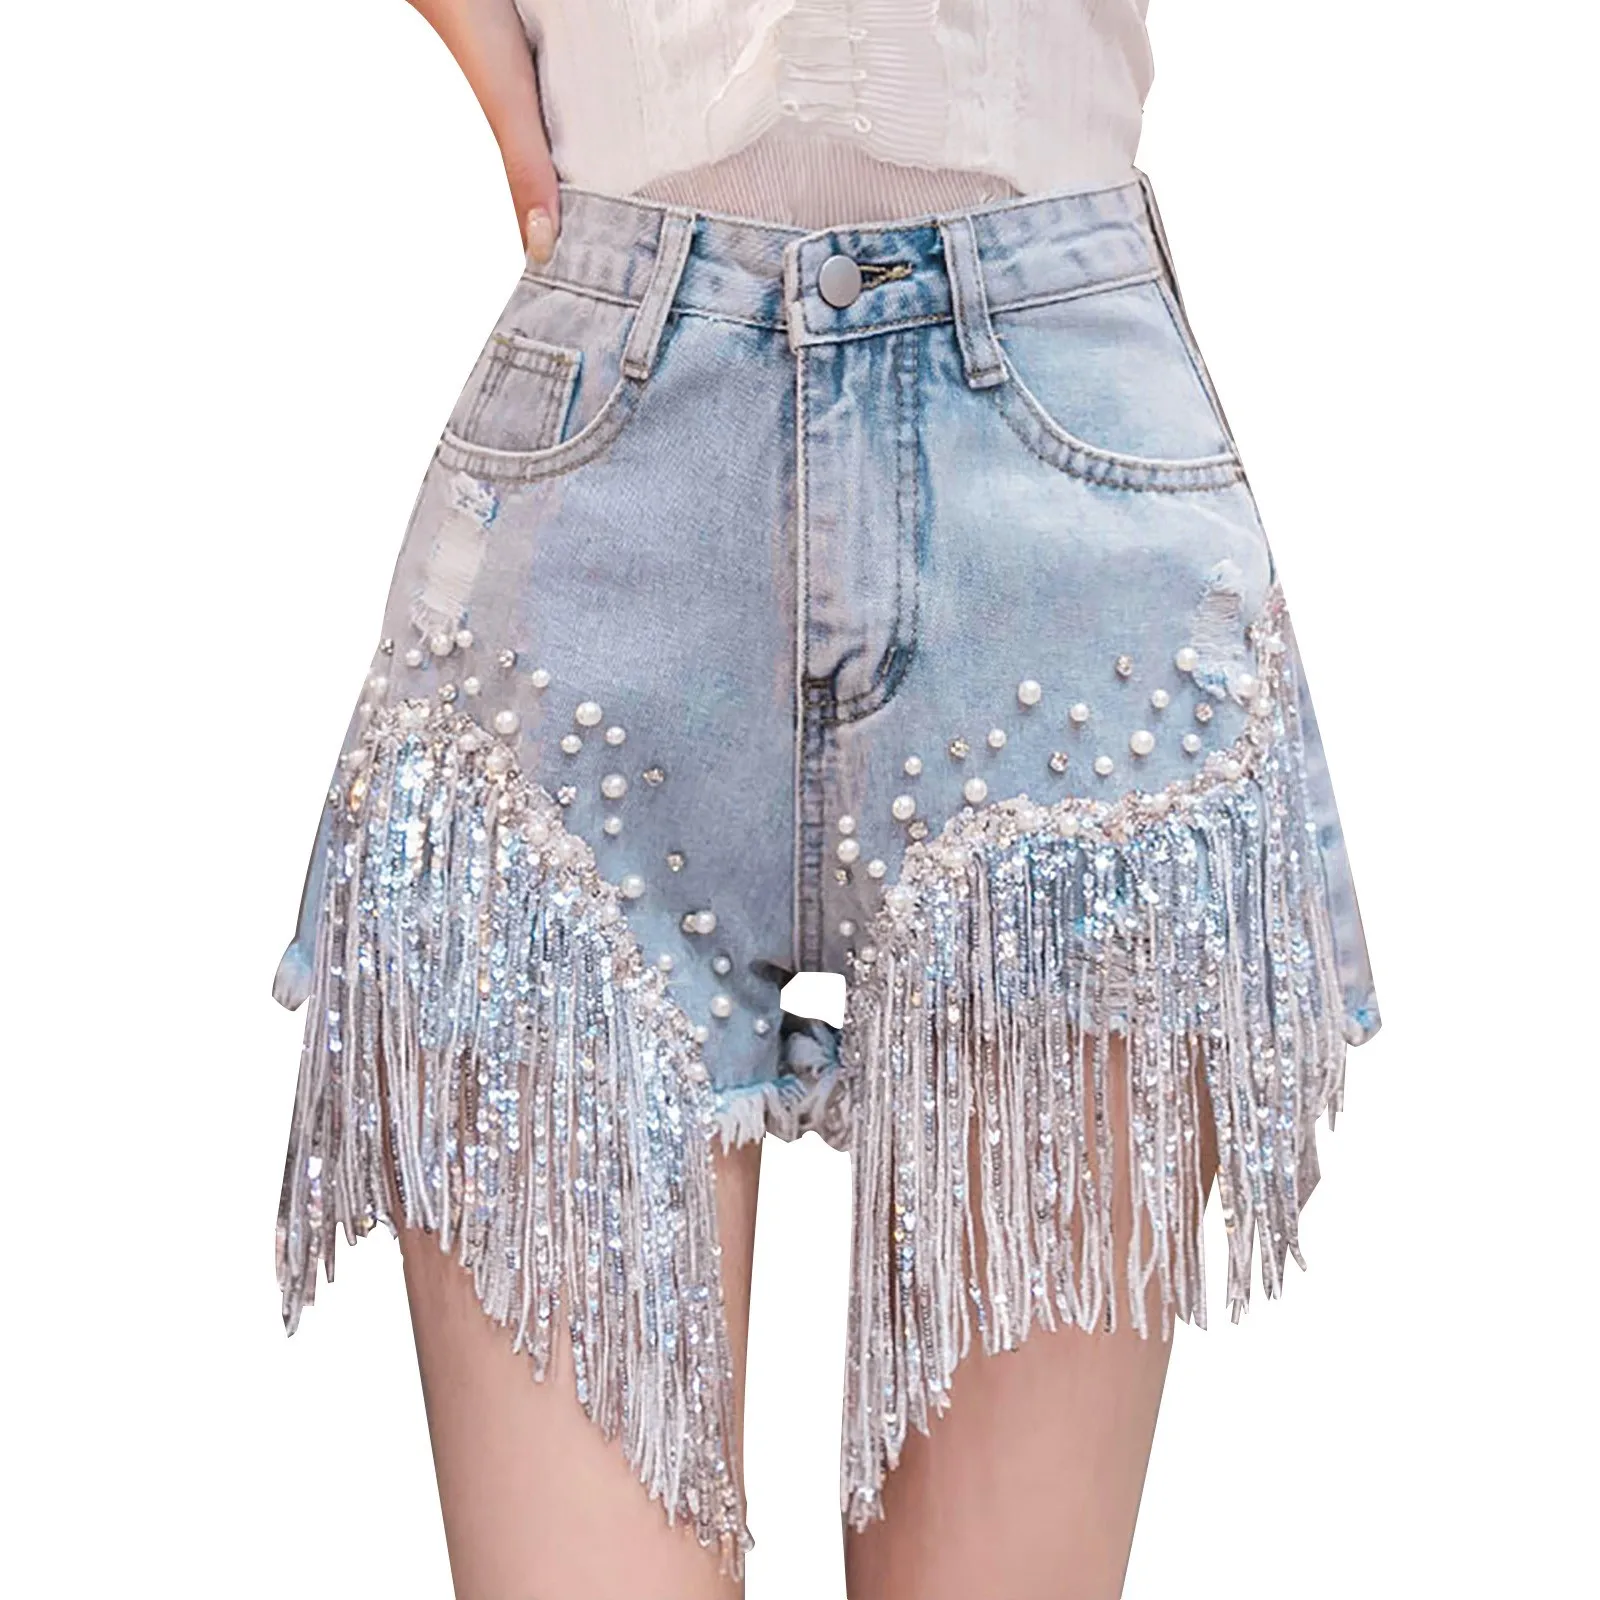 

Dresses for Women Cocktail Short Women's High Waisted Embellished Sequin Detailed A Line Flared Hot Pants Wax Shorts for Women